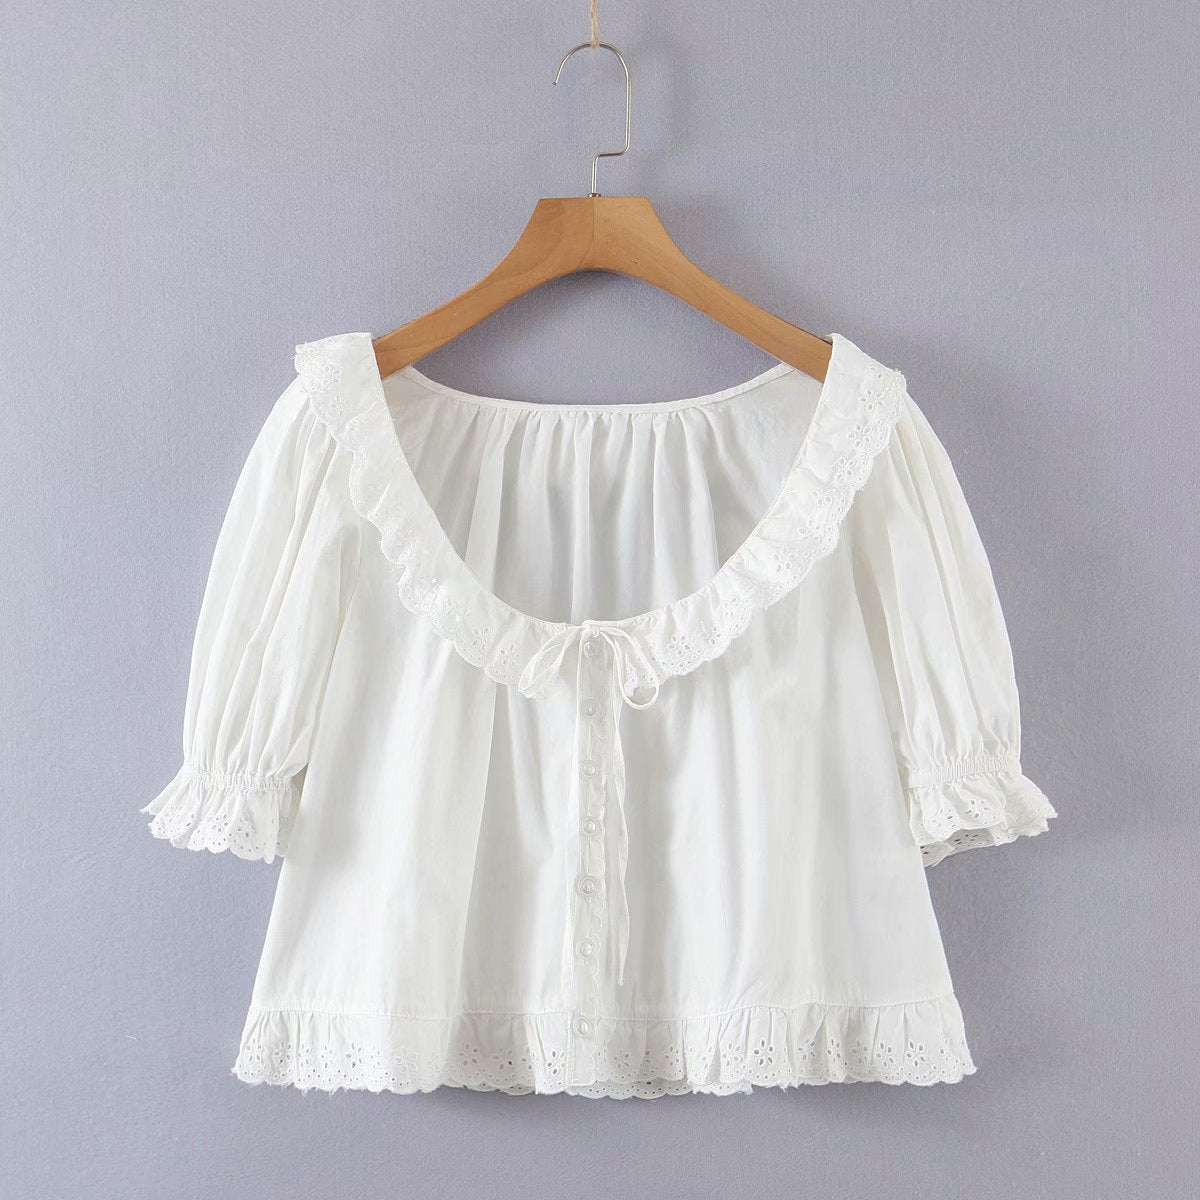 xakxx Ruffles Trim V-Neck Women's Blouse Cotton Embroidery Hollow Out Lace-Up Ladies Short Puff Sleeve Sweet Shirt And Top  Summer